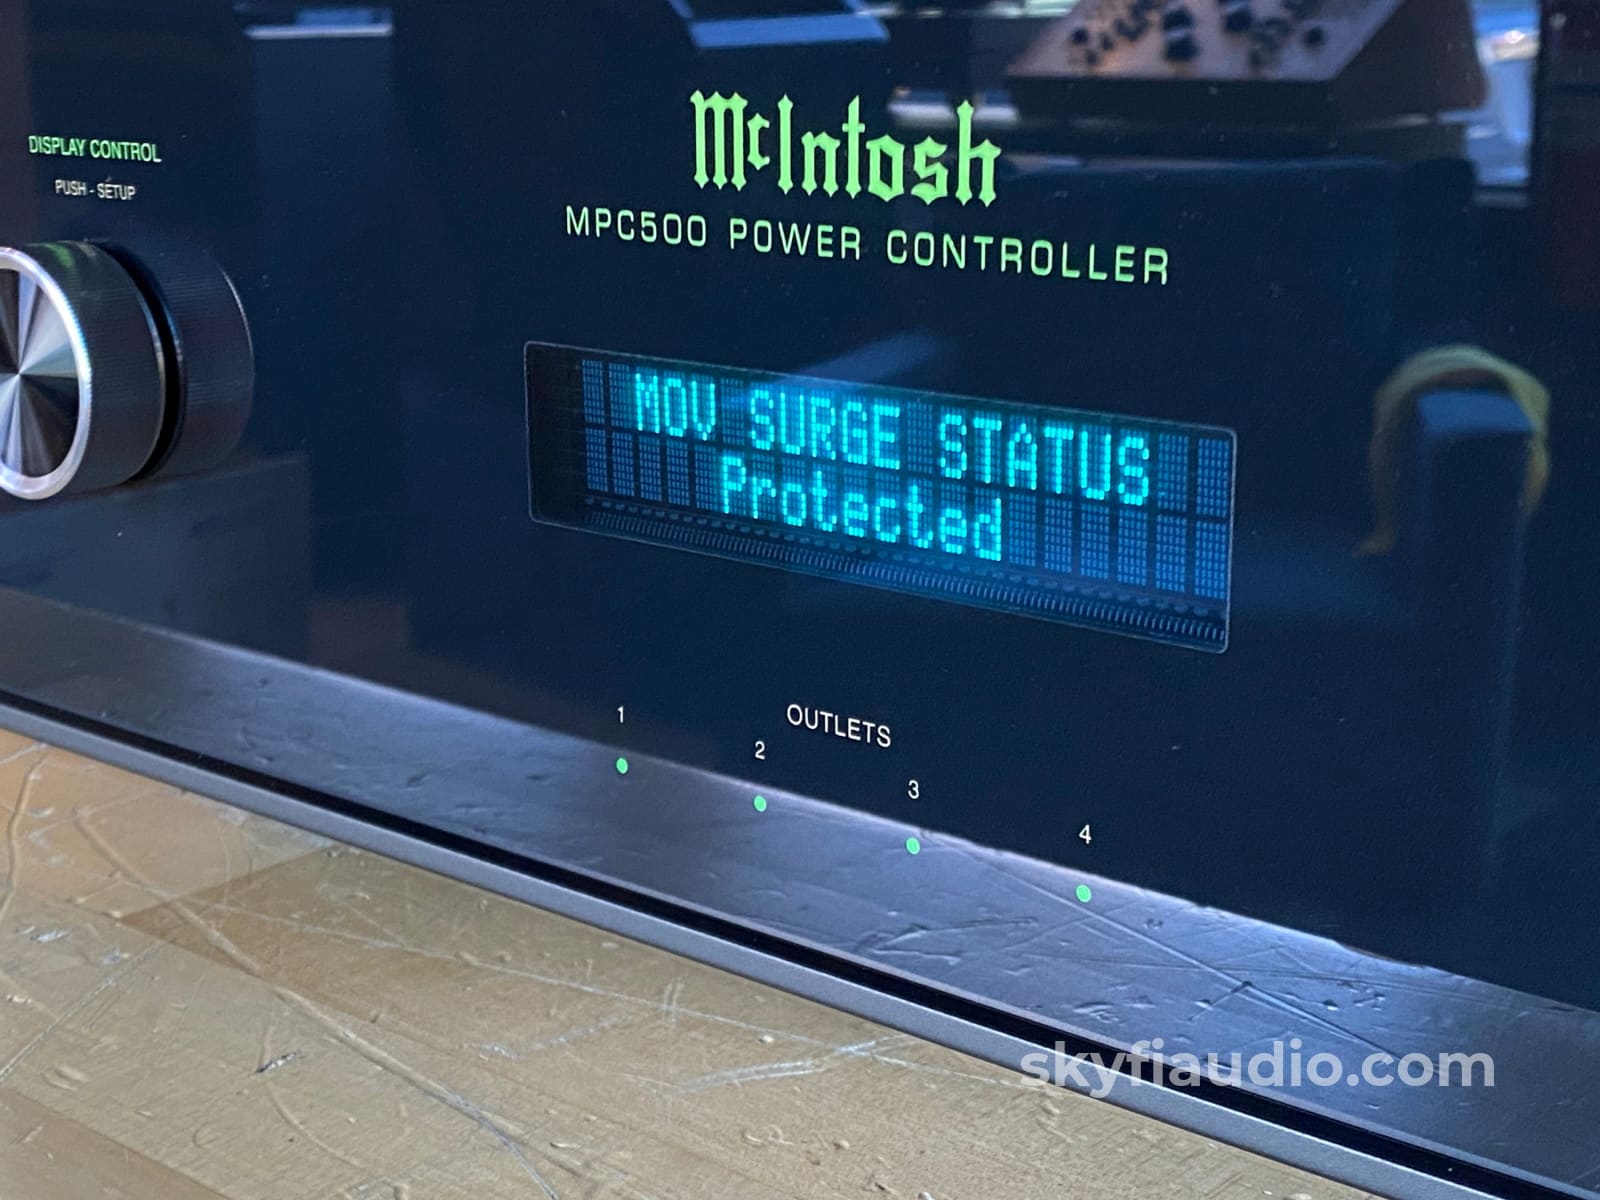 Mcintosh Mpc500 Power Contoler Super Clean And Complete - In Store Only Accessory